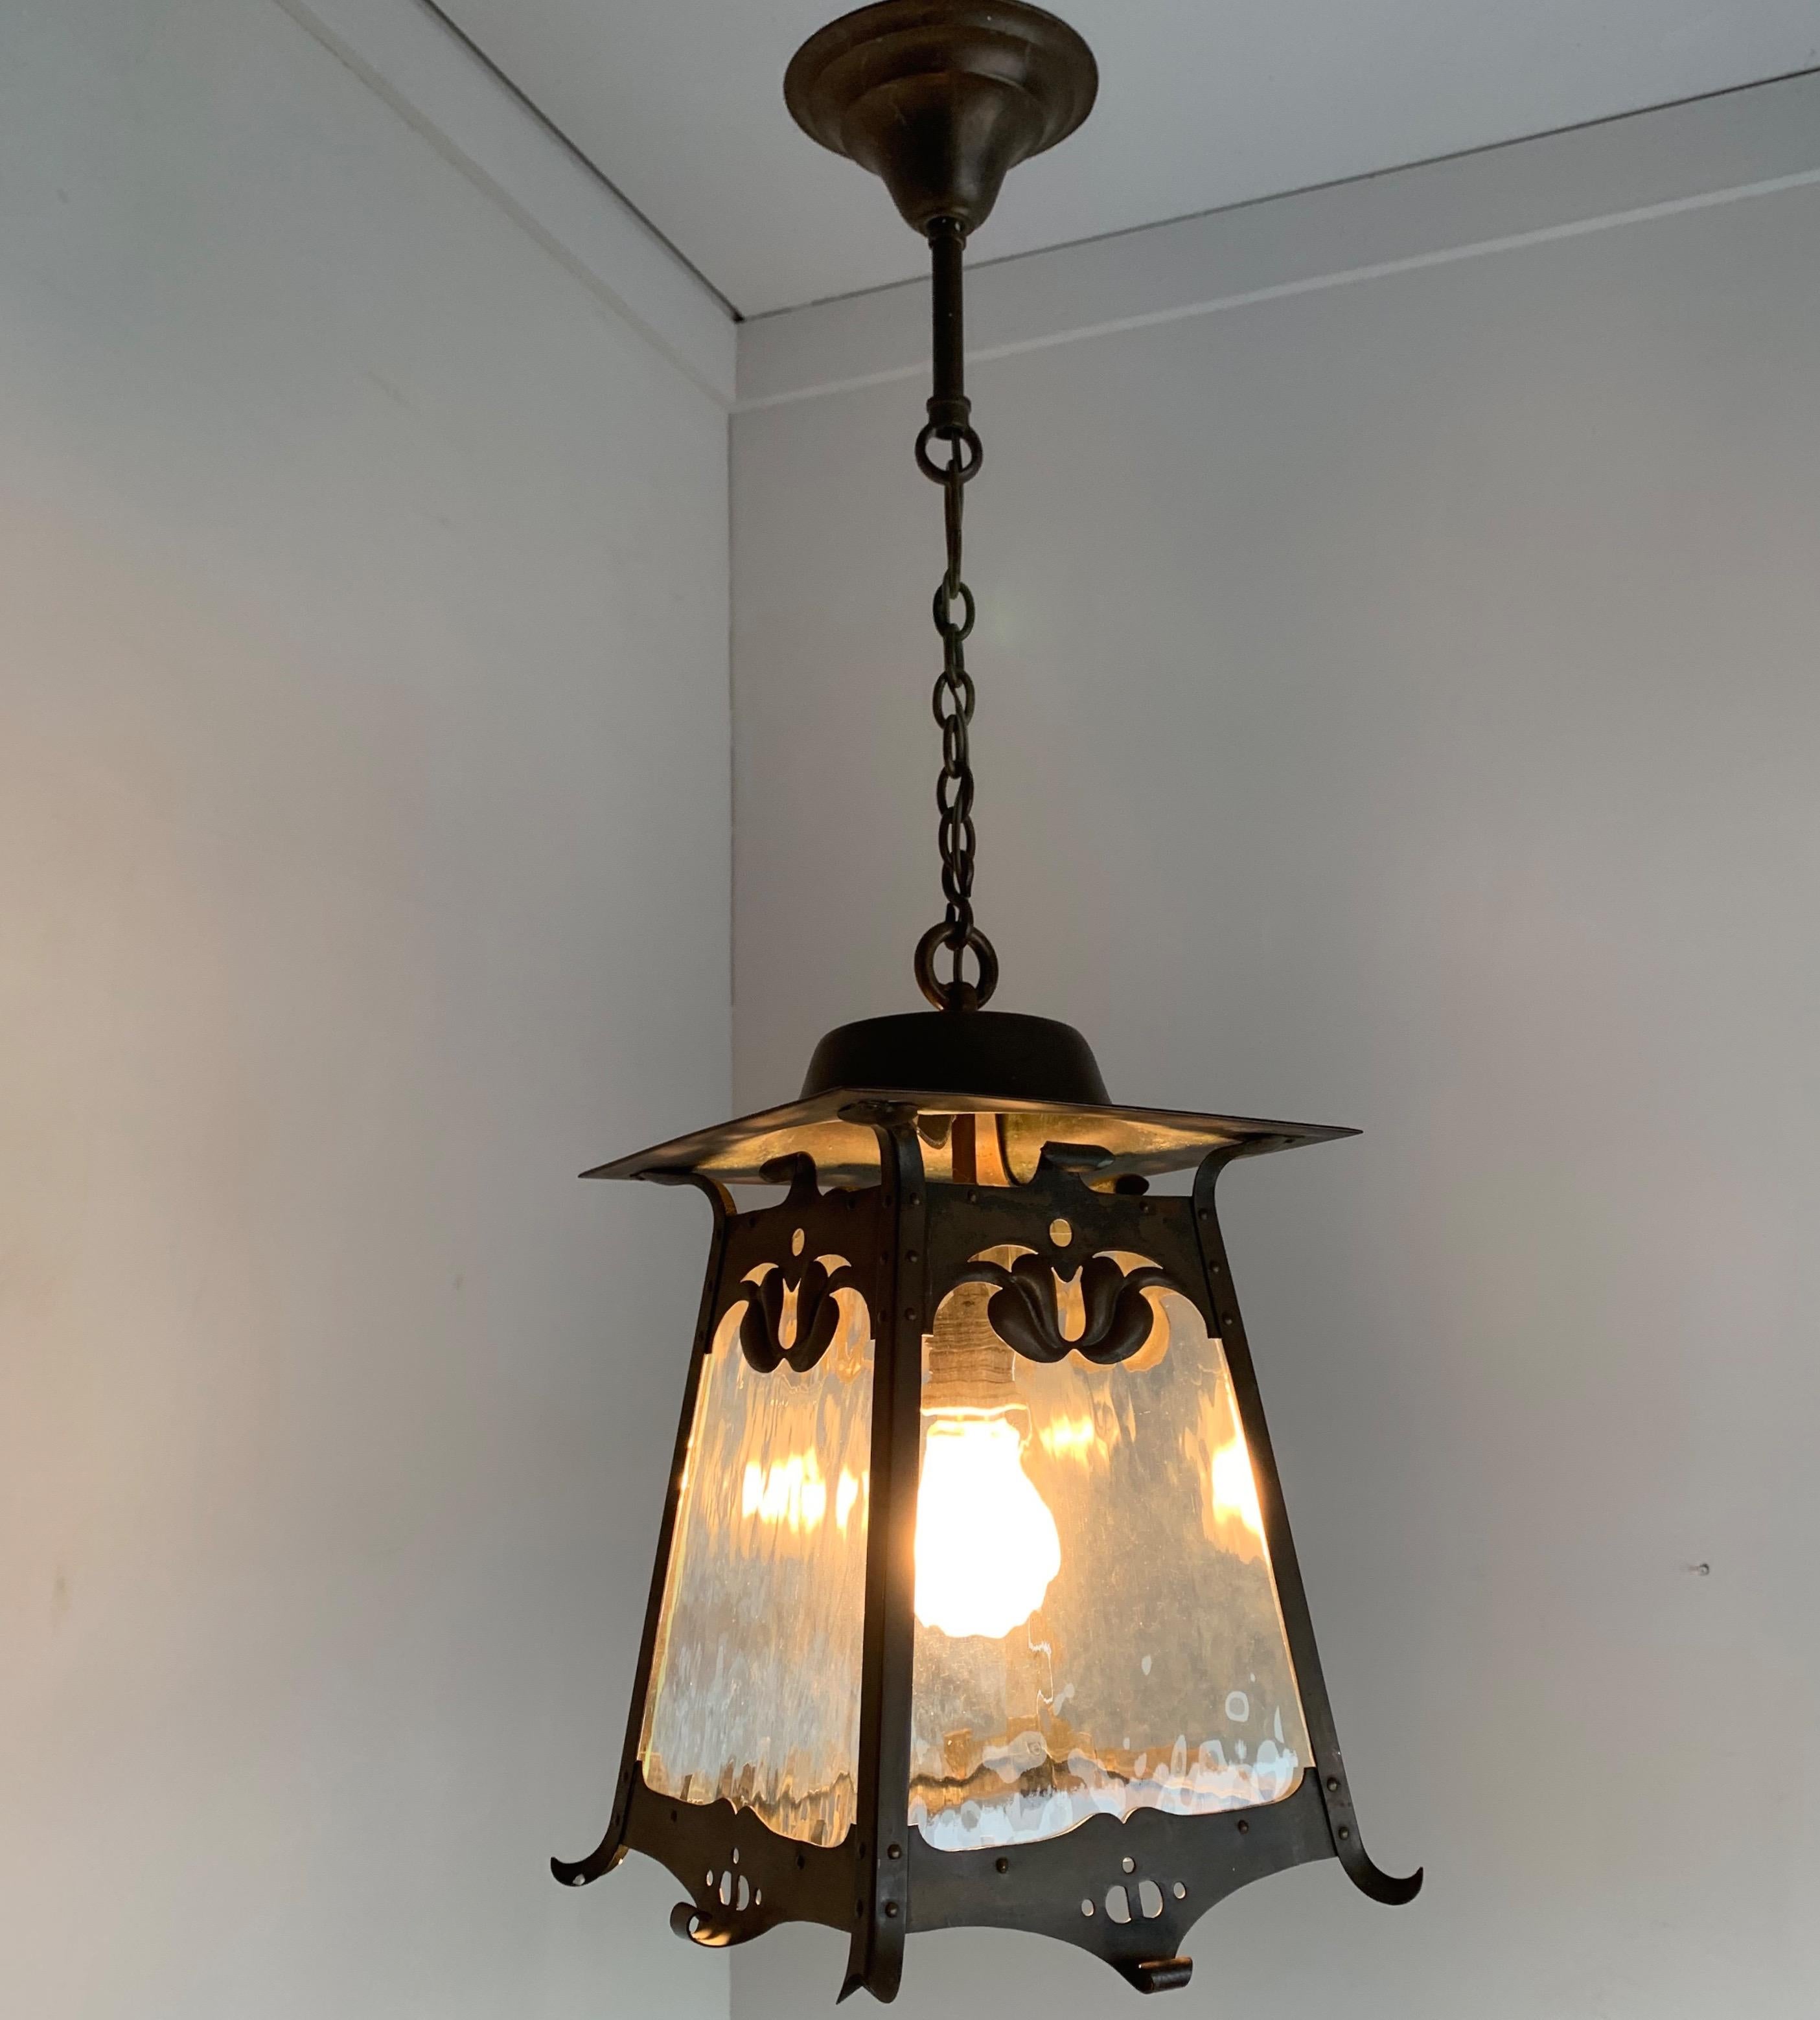 European Rare Arts & Crafts Patinated Copper & Cathedral Glass Pendant Light / Lantern